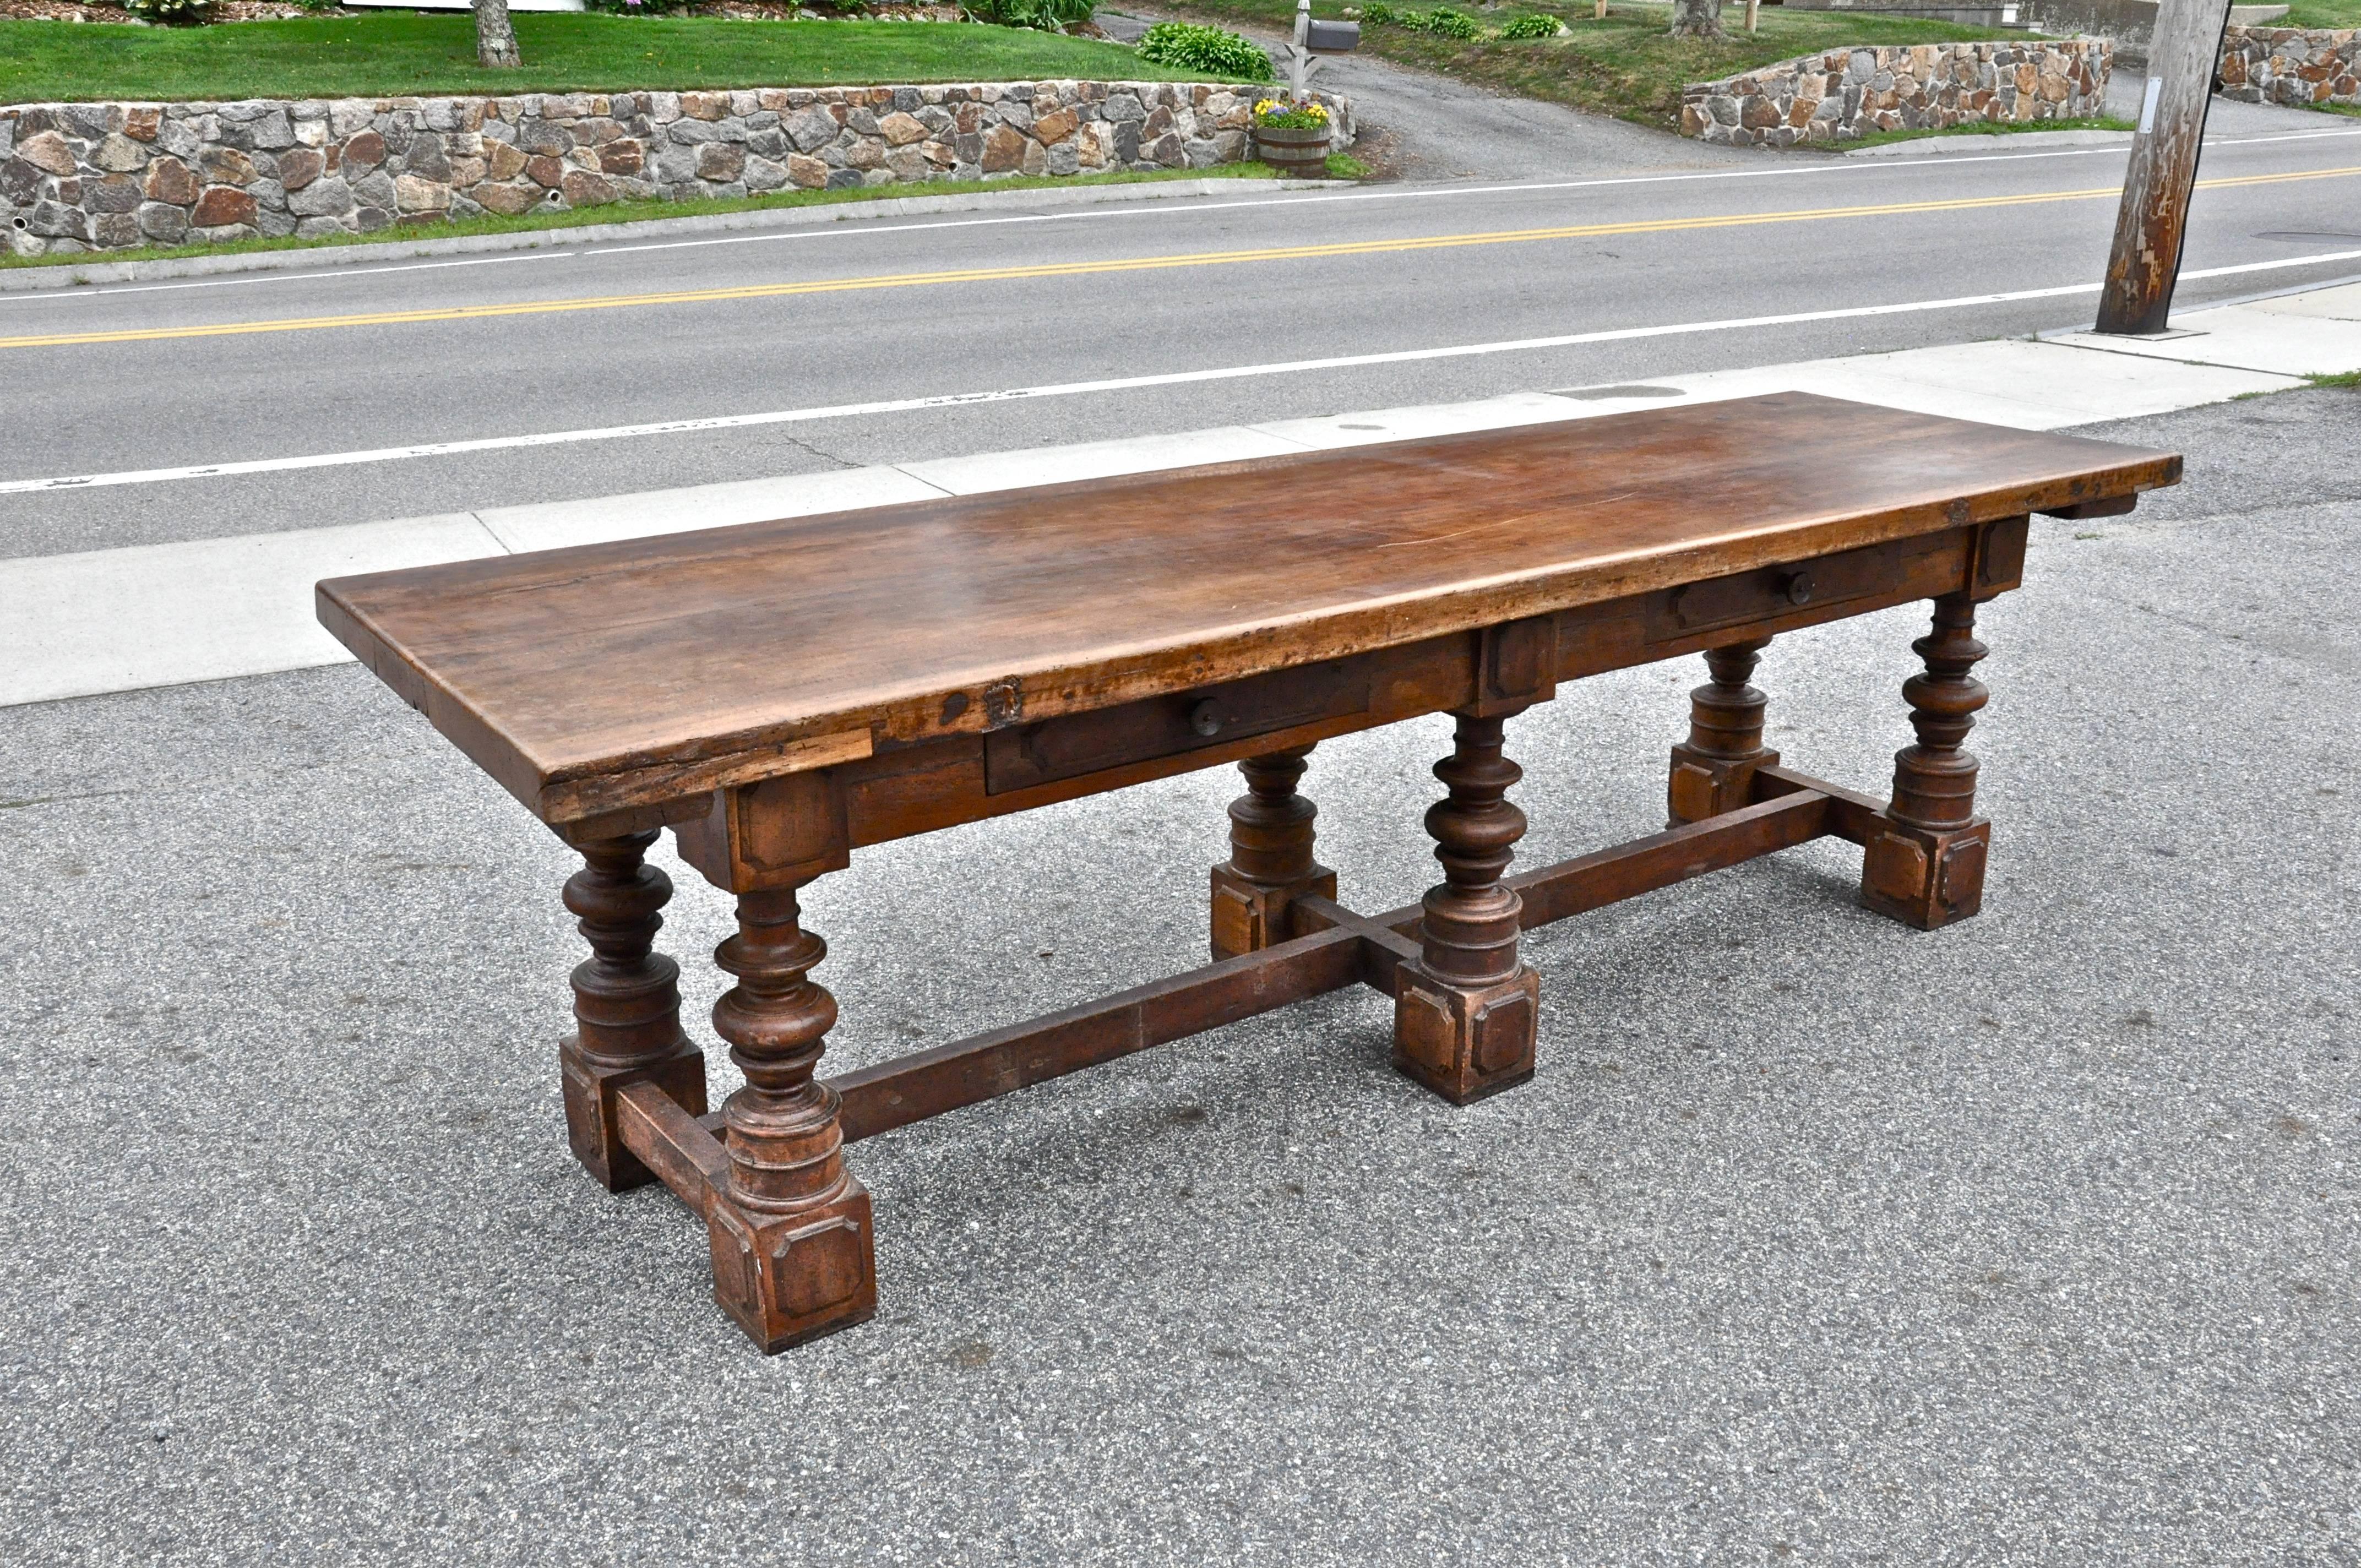 Beautiful Italian walnut refectory table of the 18th century.

Turned walnut legs, two drawers on one side, original stretchers, two board top.
Original dry finish to base
minor restorations
stabile and sound.
Florentine, early 18th century.